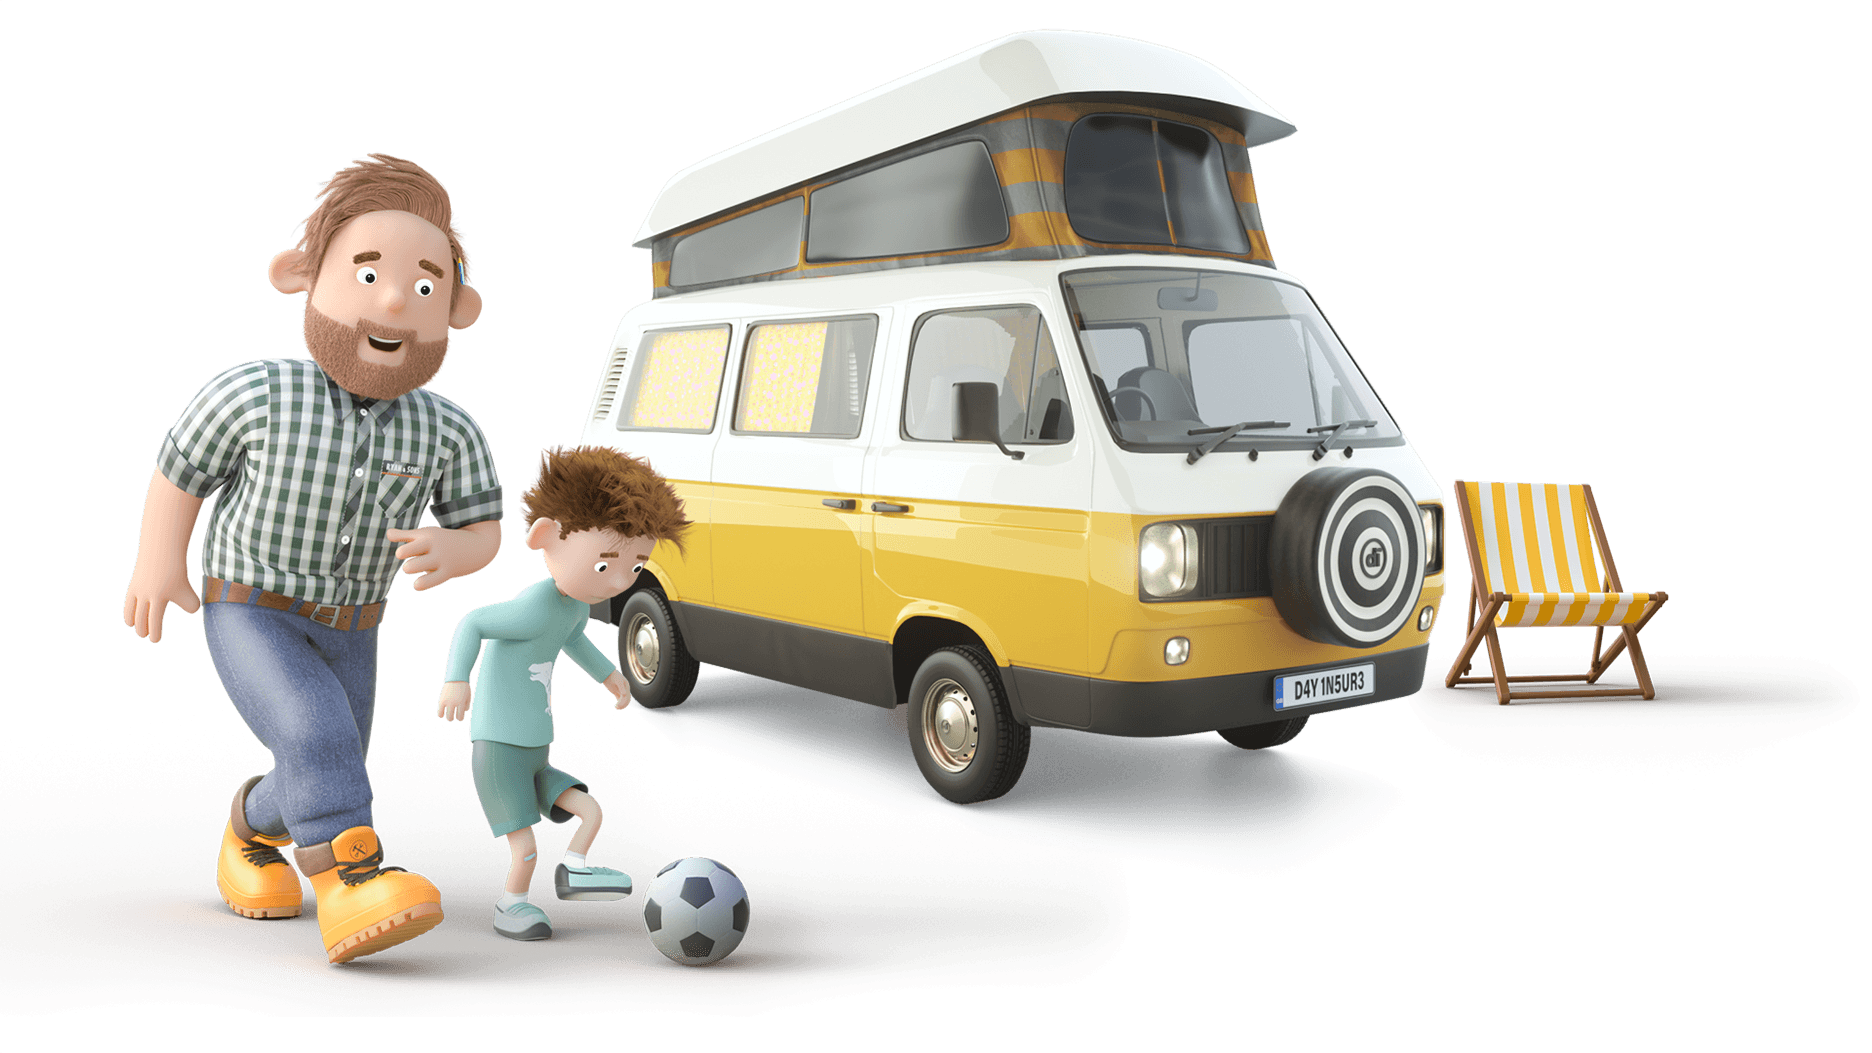 Dayinsure Dad and Son playing in front of Motorhome